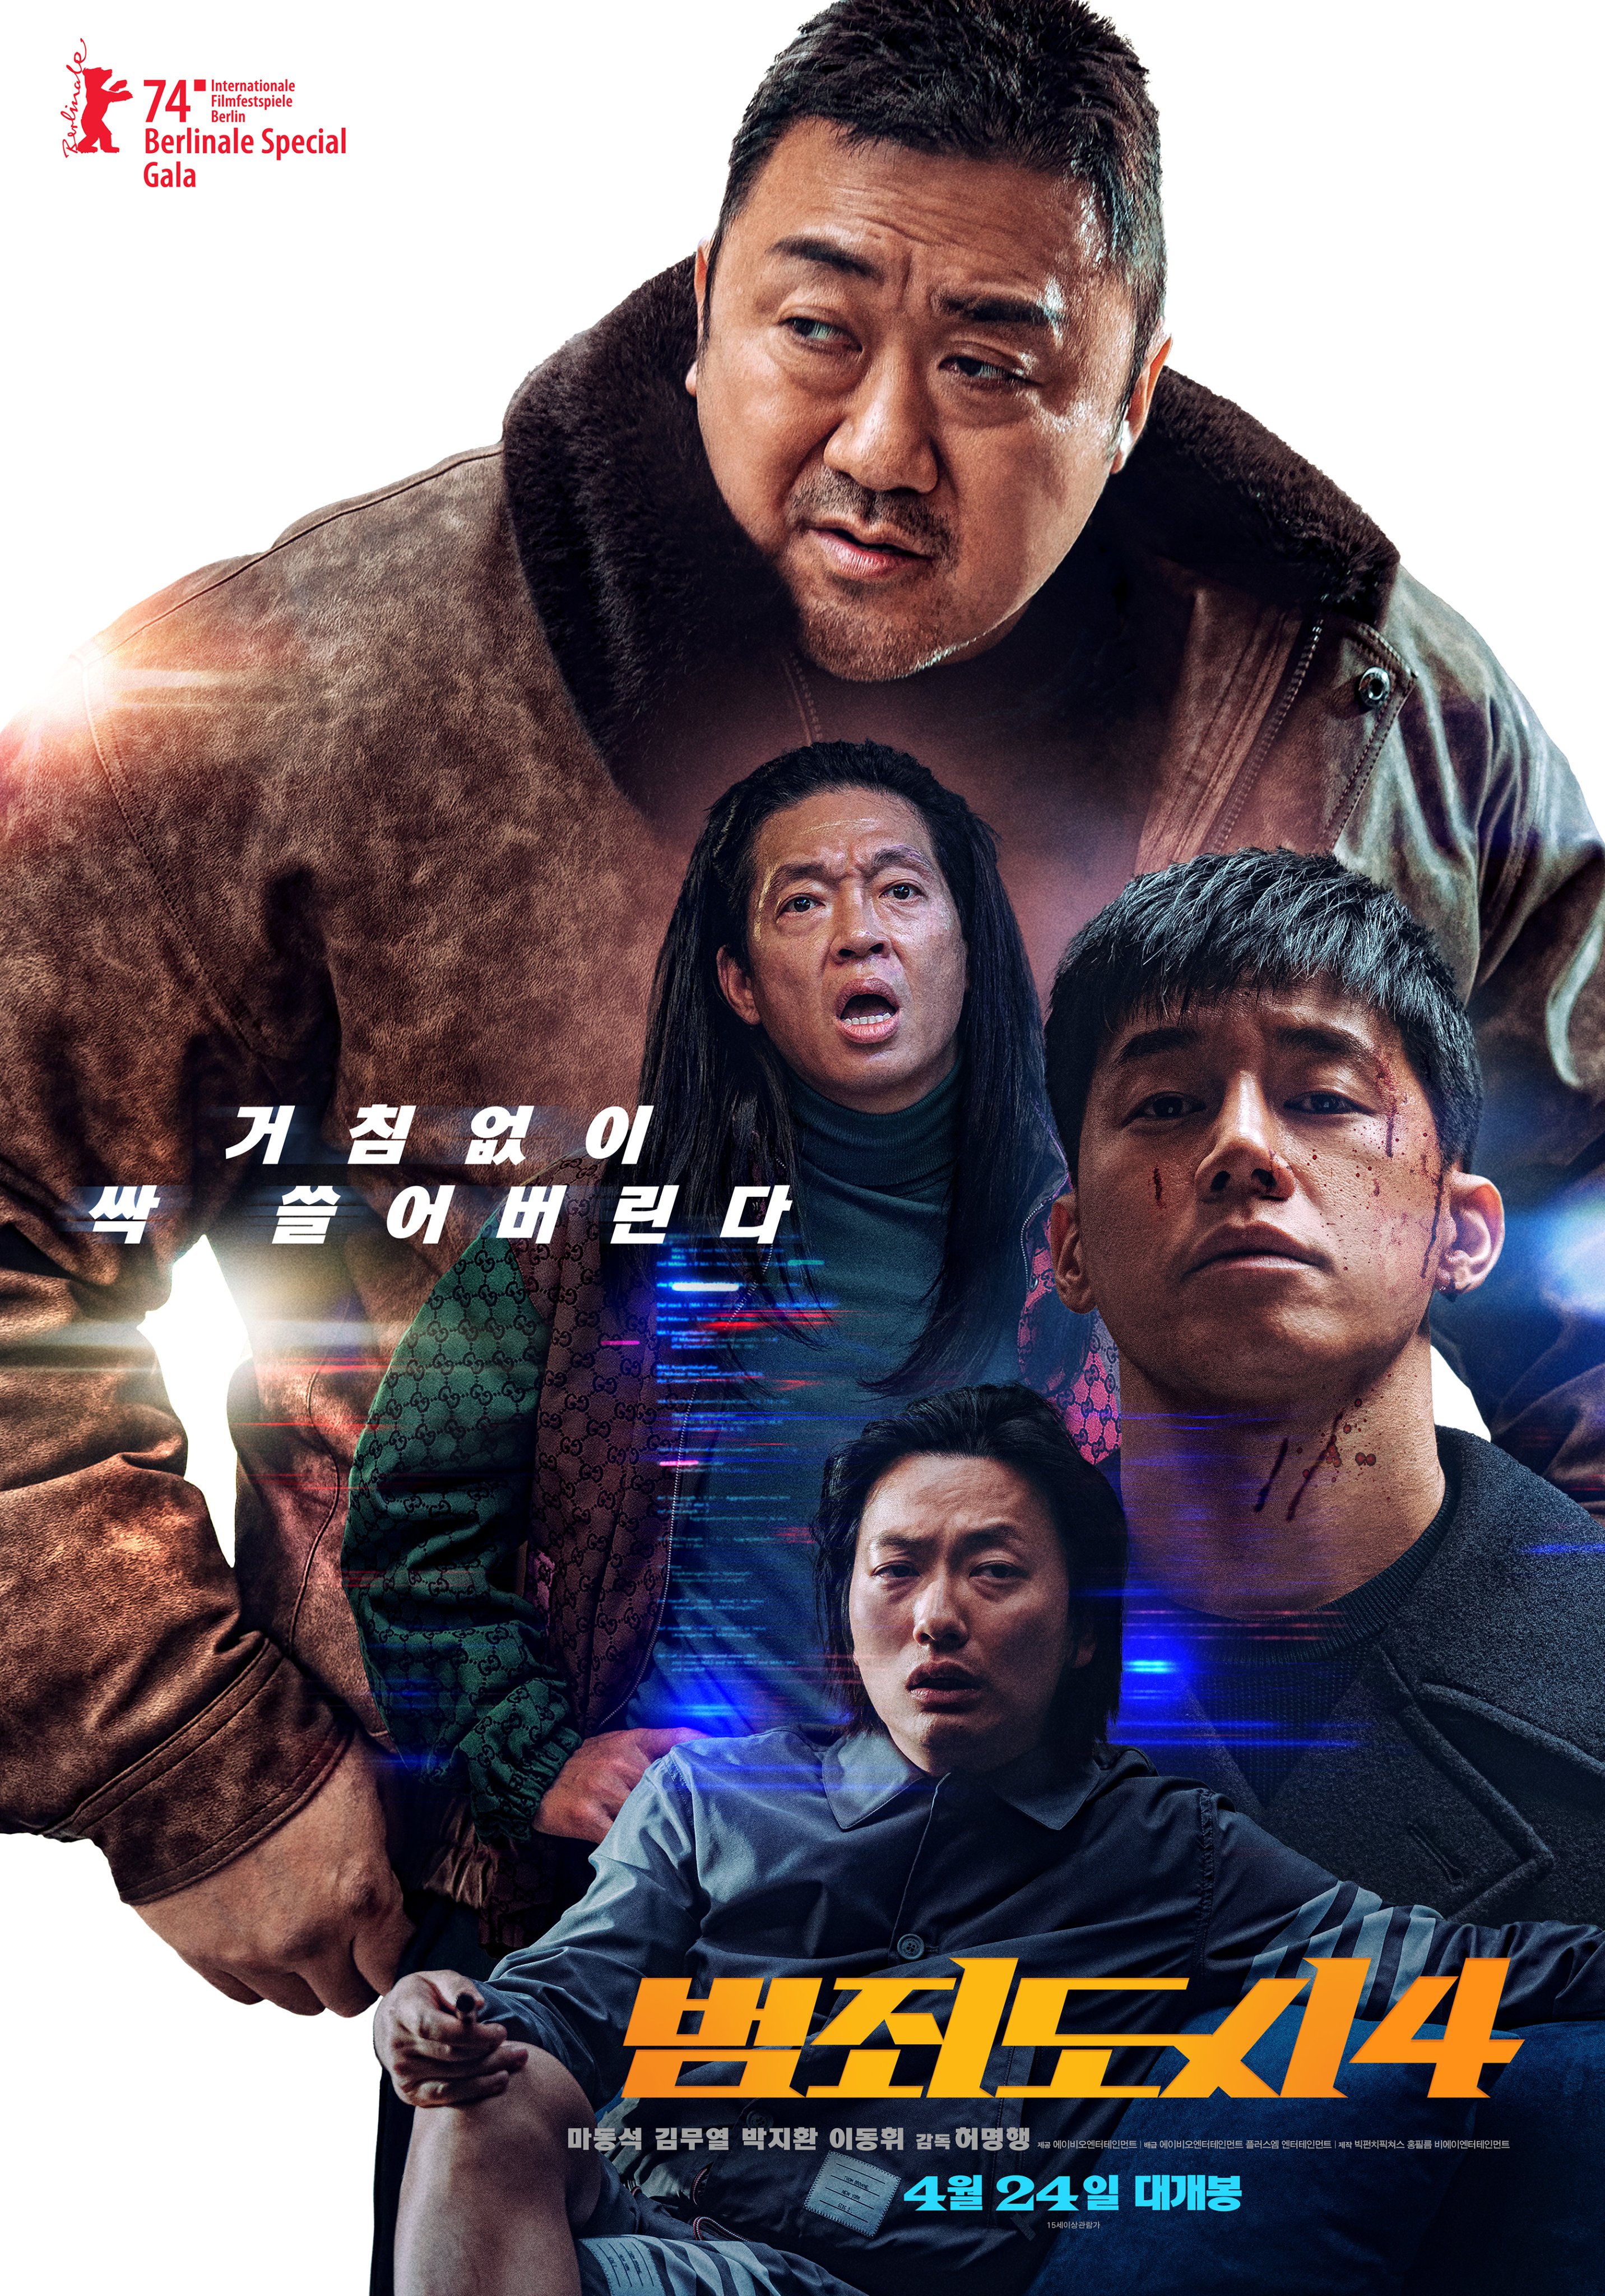 Ma Dong Seok Faces Off Against Kim Moo Yeol And More In Dynamic “The Roundup : Punishment” Posters